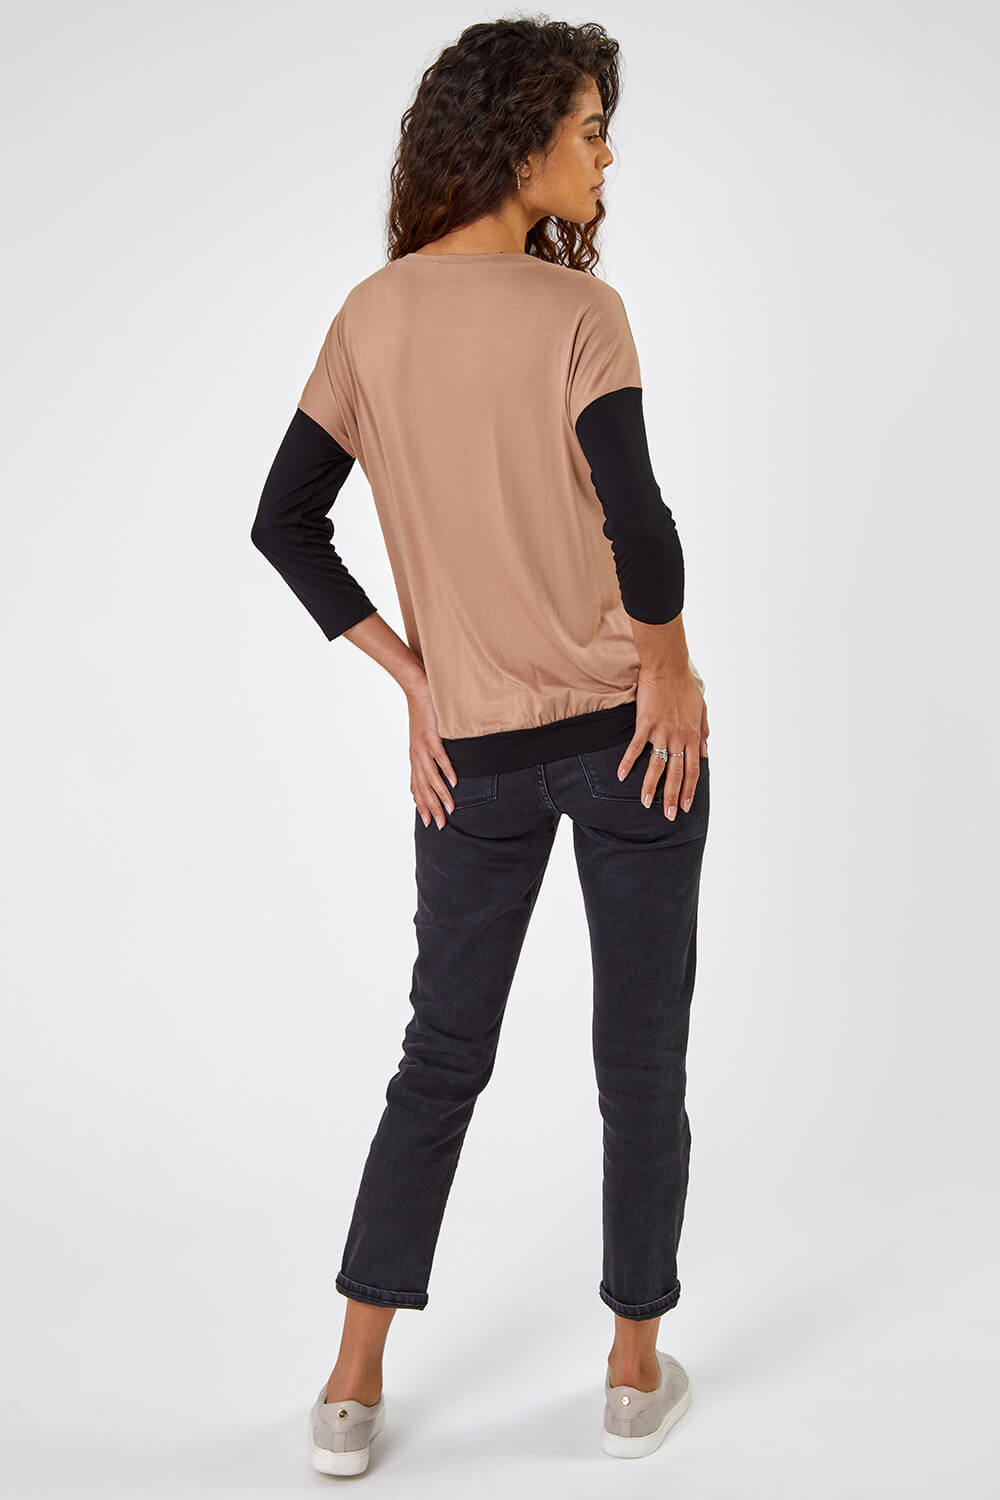 Camel  Colour Block Jersey Stretch Top, Image 2 of 5